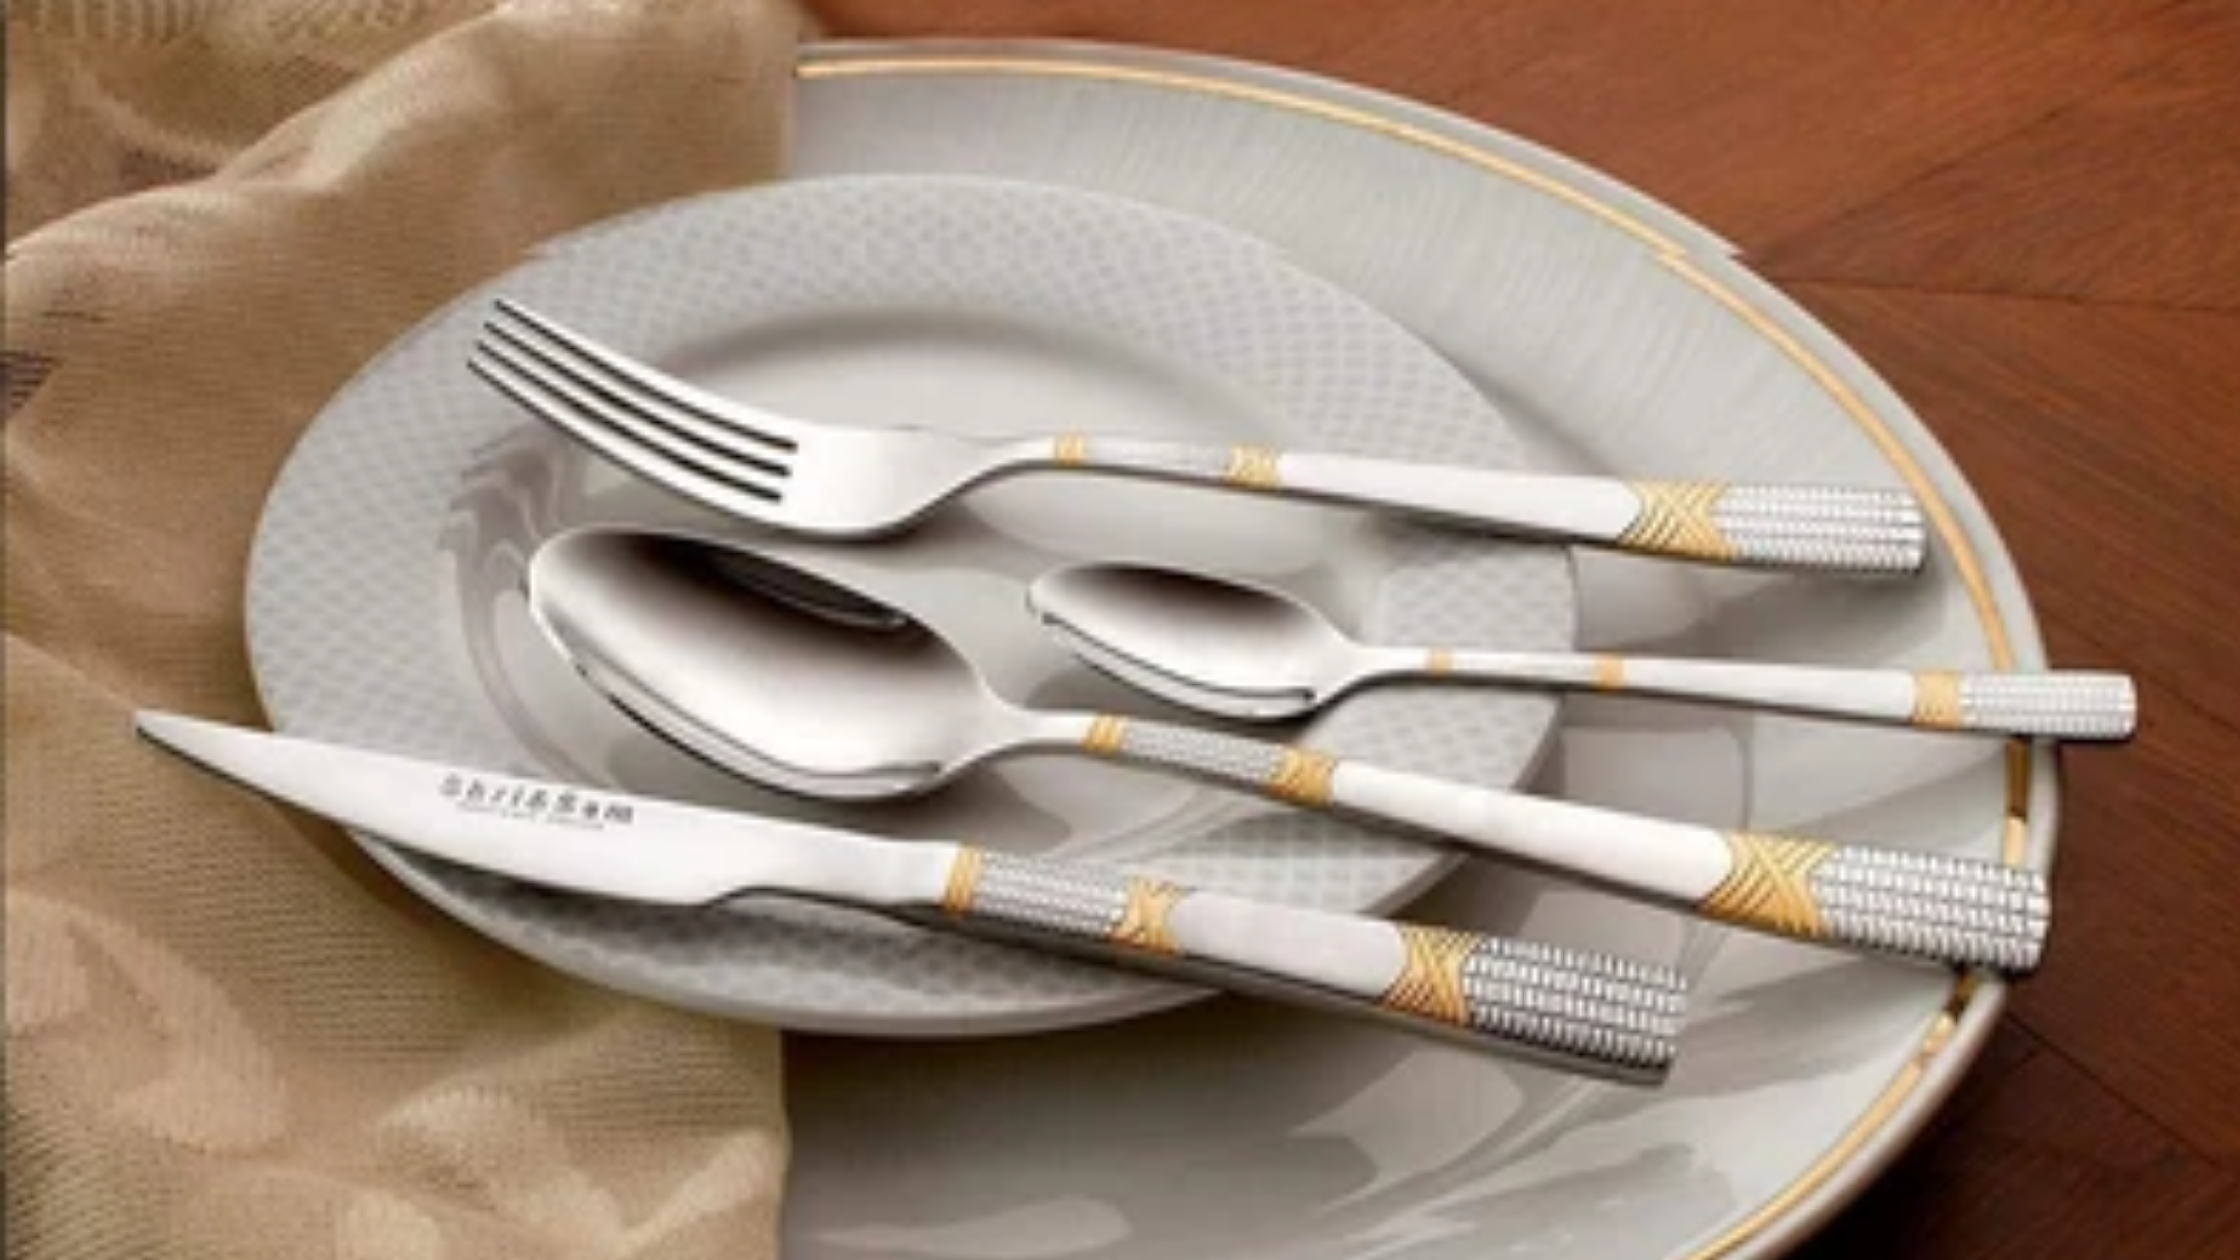 Use the right type of spoon and fork for Food and Beverage Service